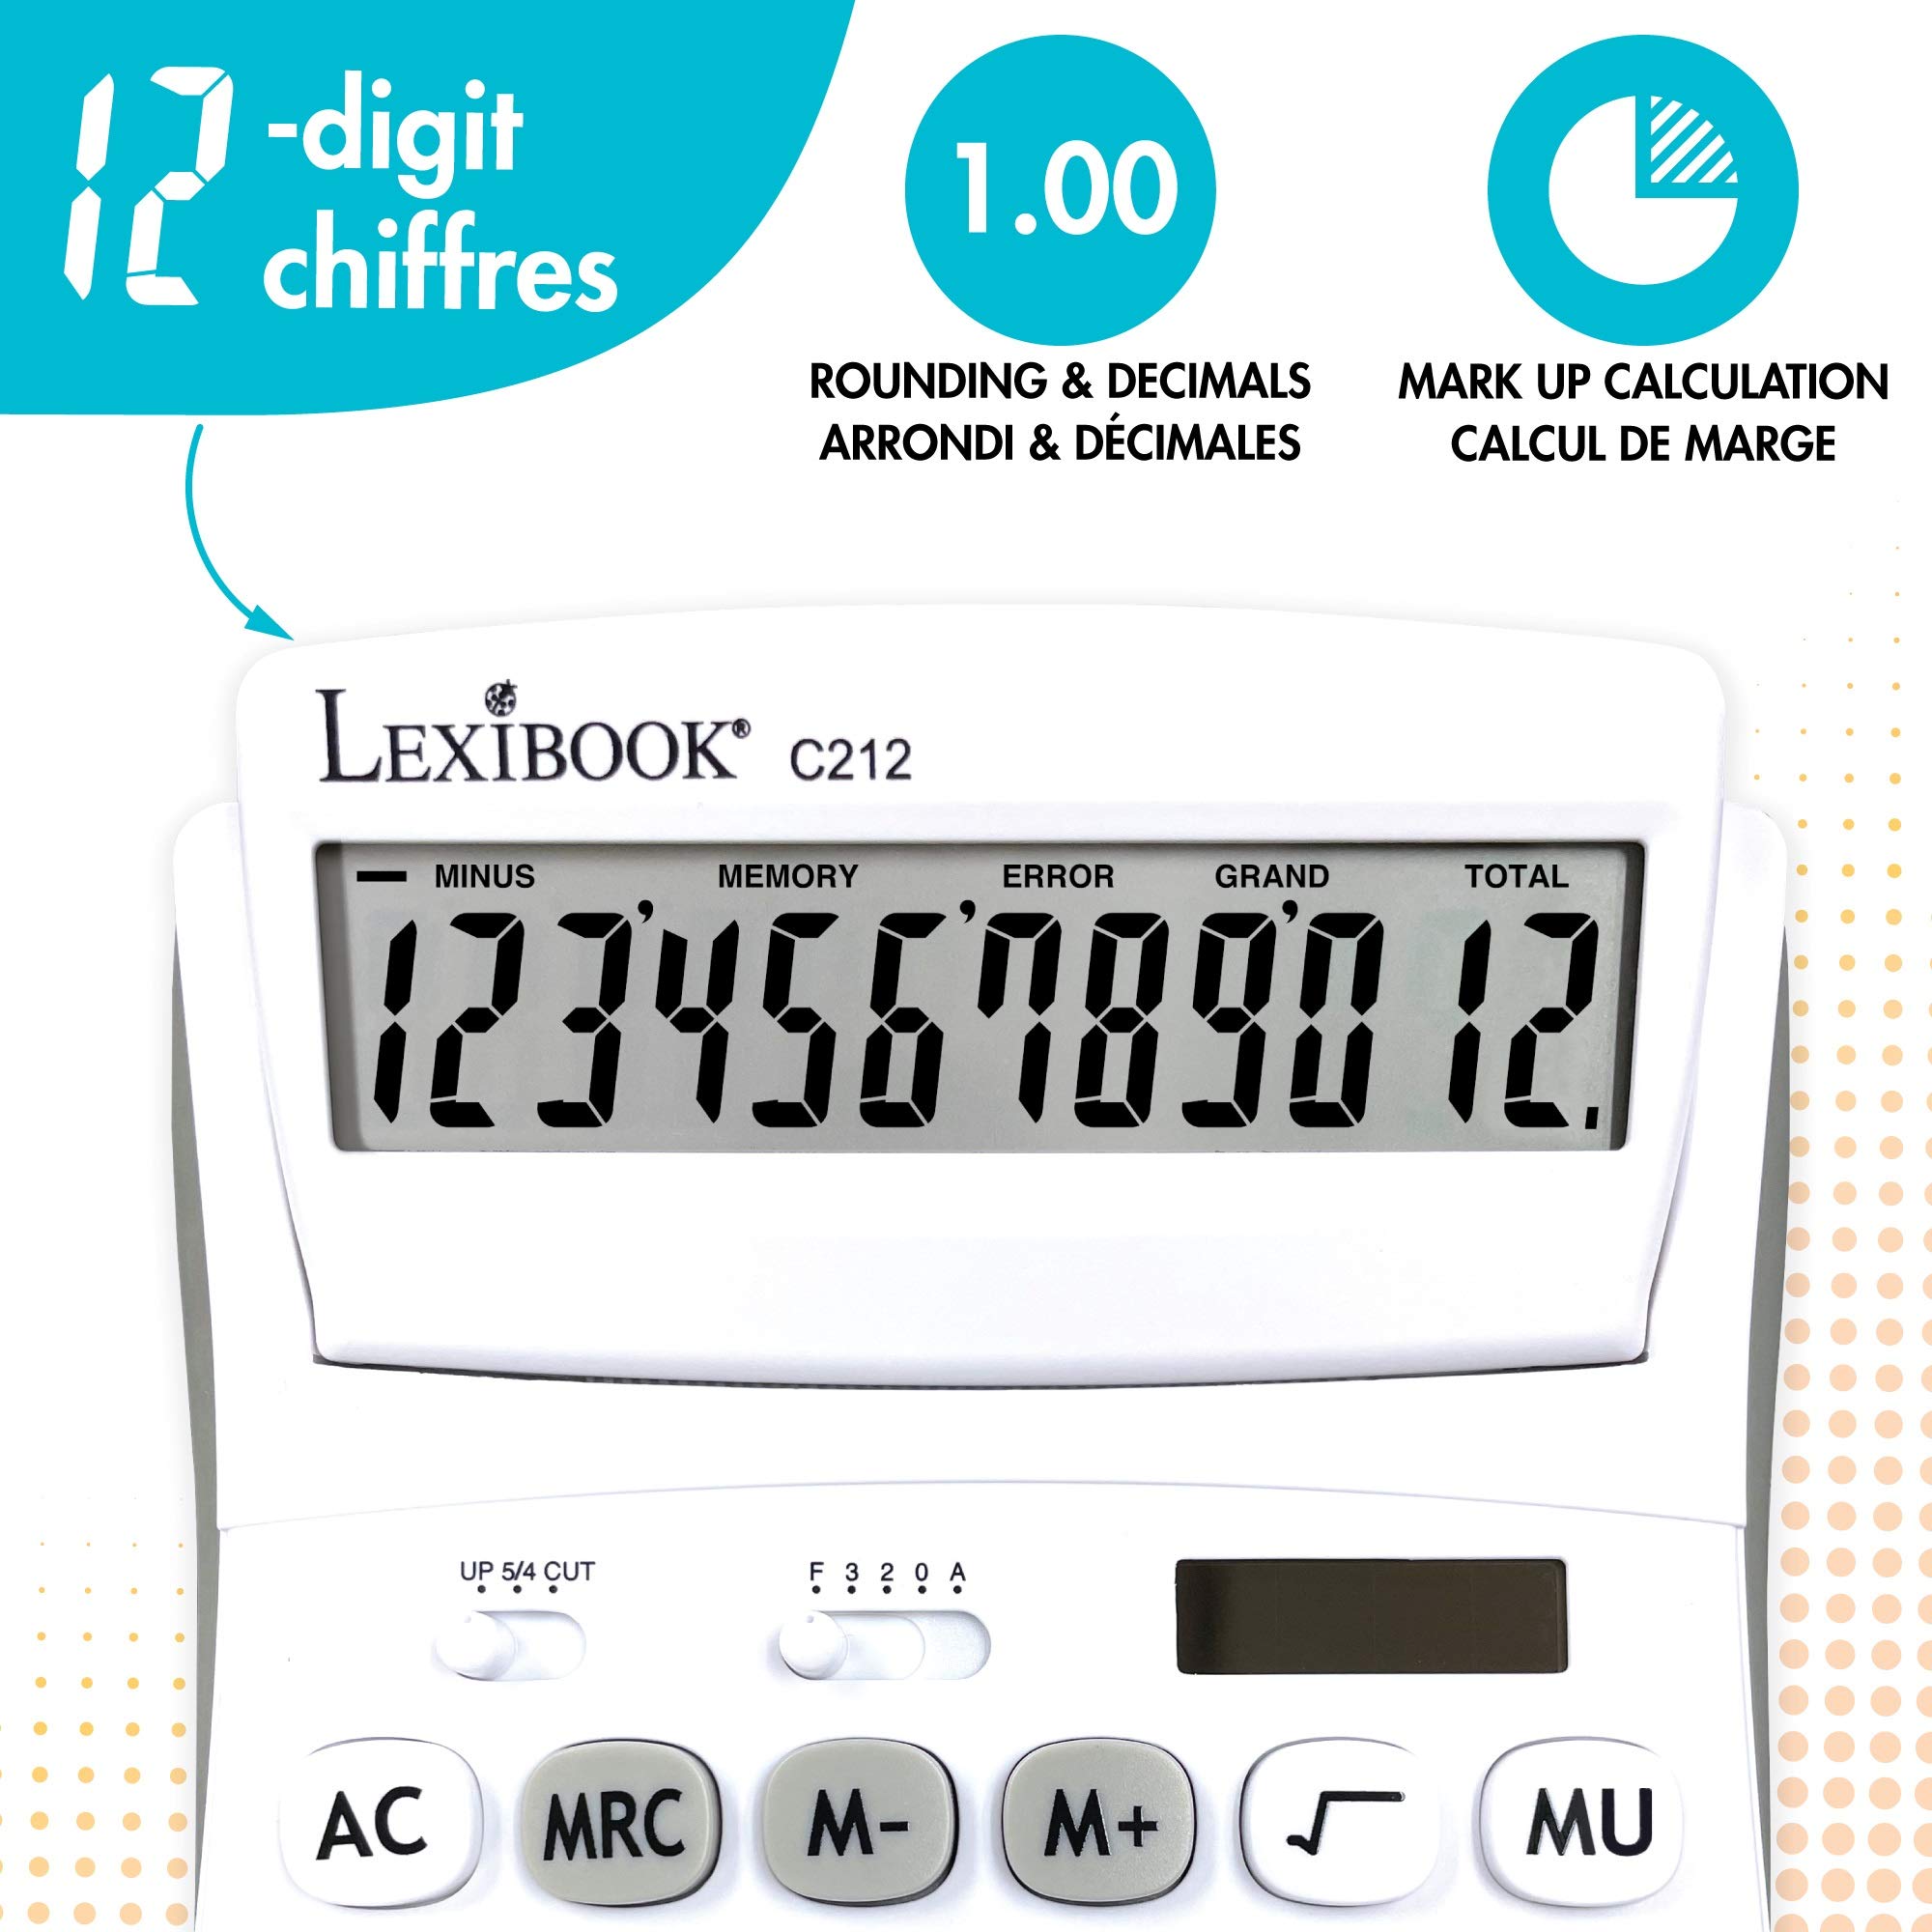 Lexibook - 12 Digit Desktop Calculator with Folding Display - Basic and Memory Function - Large Keys and Screen for Office, School, Home - Solar & Batteries - White/Gray - C212